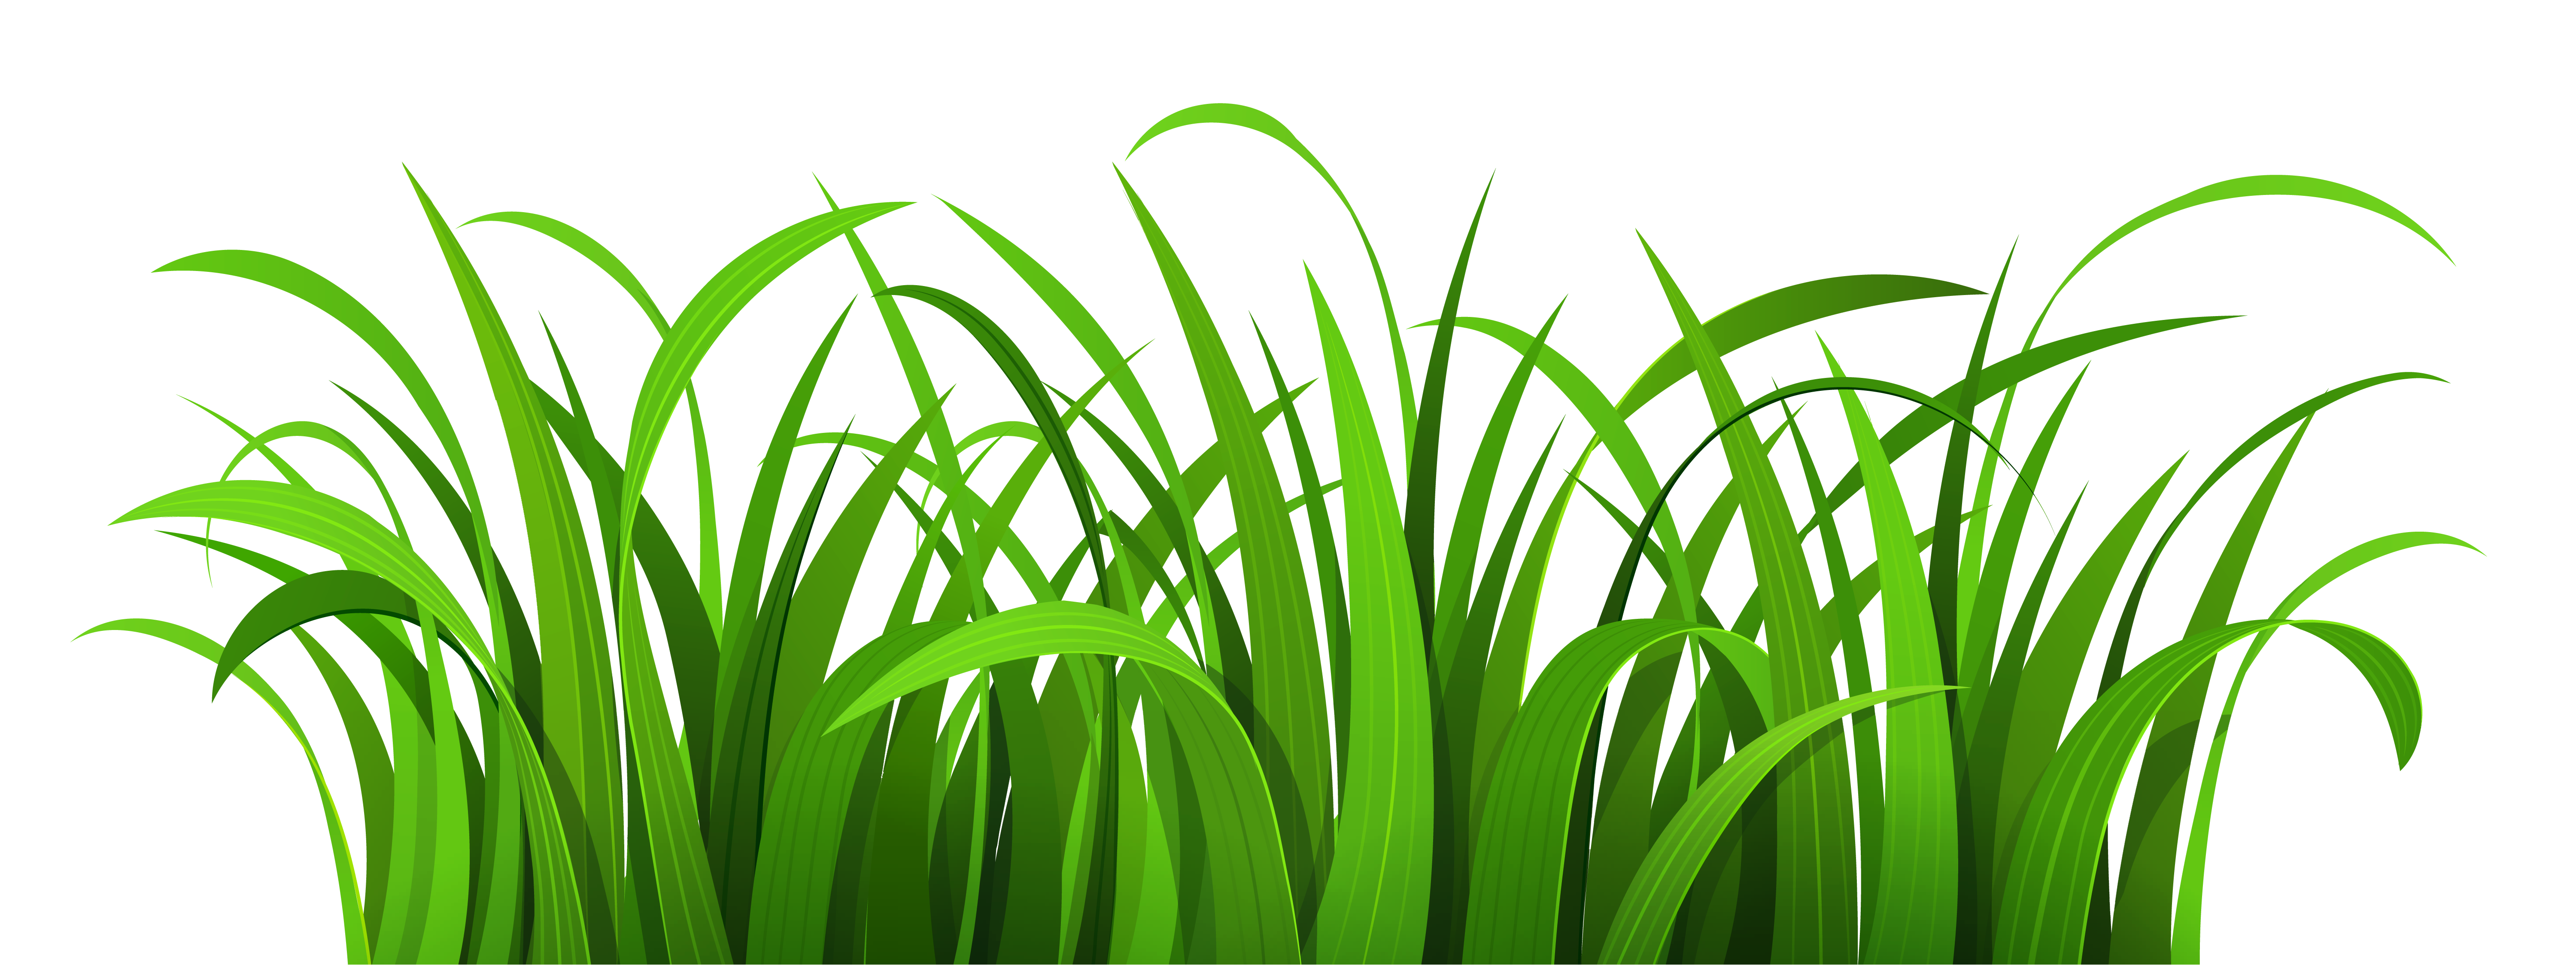 free clipart of green grass - photo #9